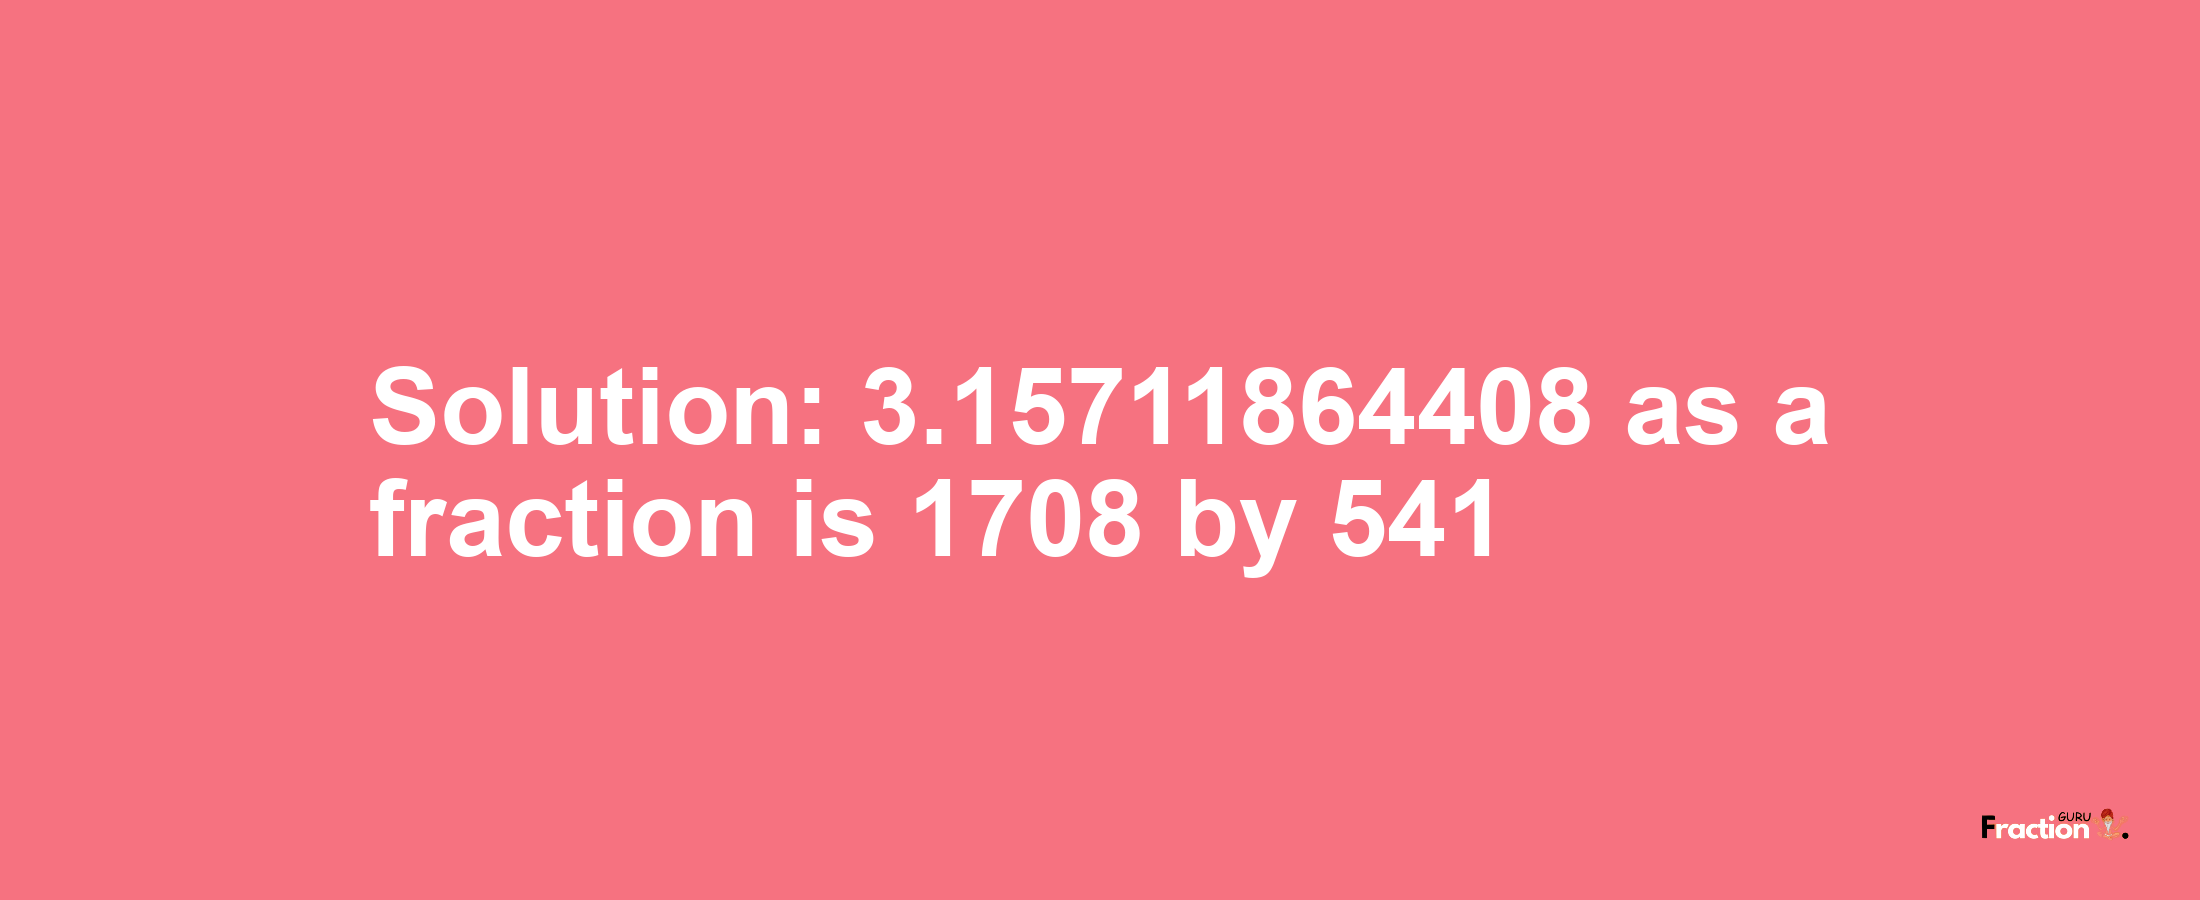 Solution:3.15711864408 as a fraction is 1708/541